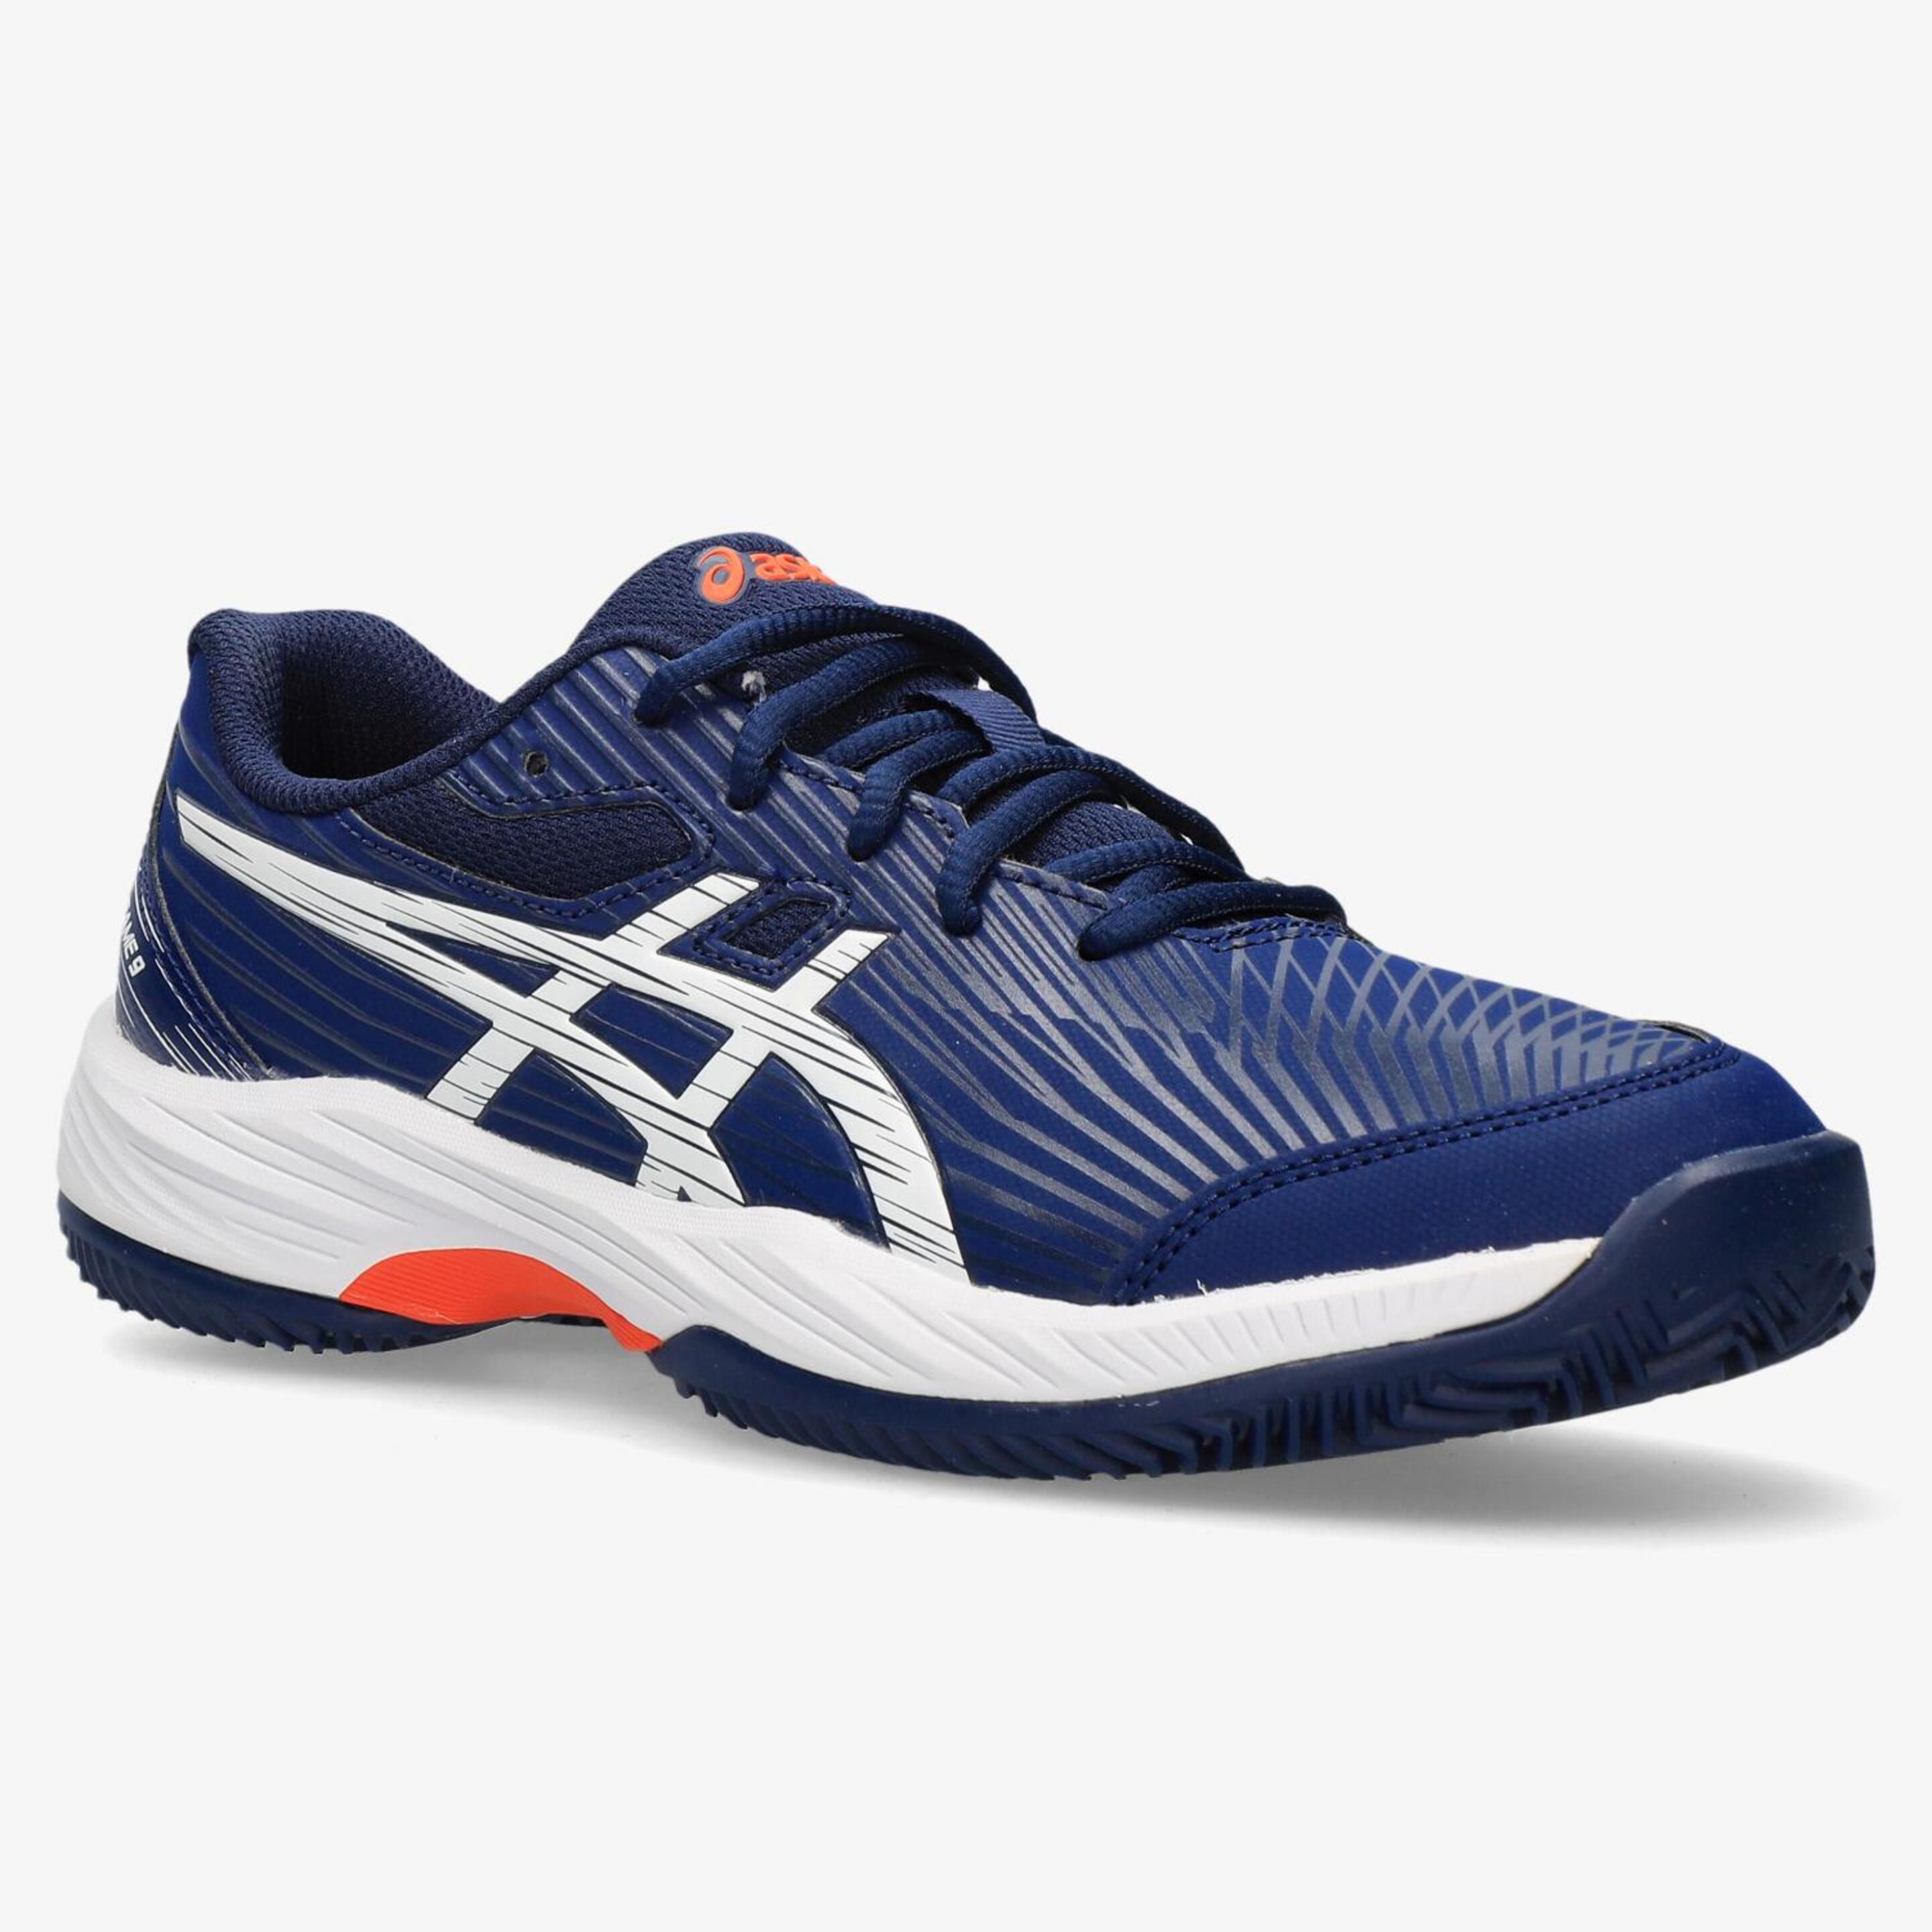 ASICS Gel-game 9 Gs Clay